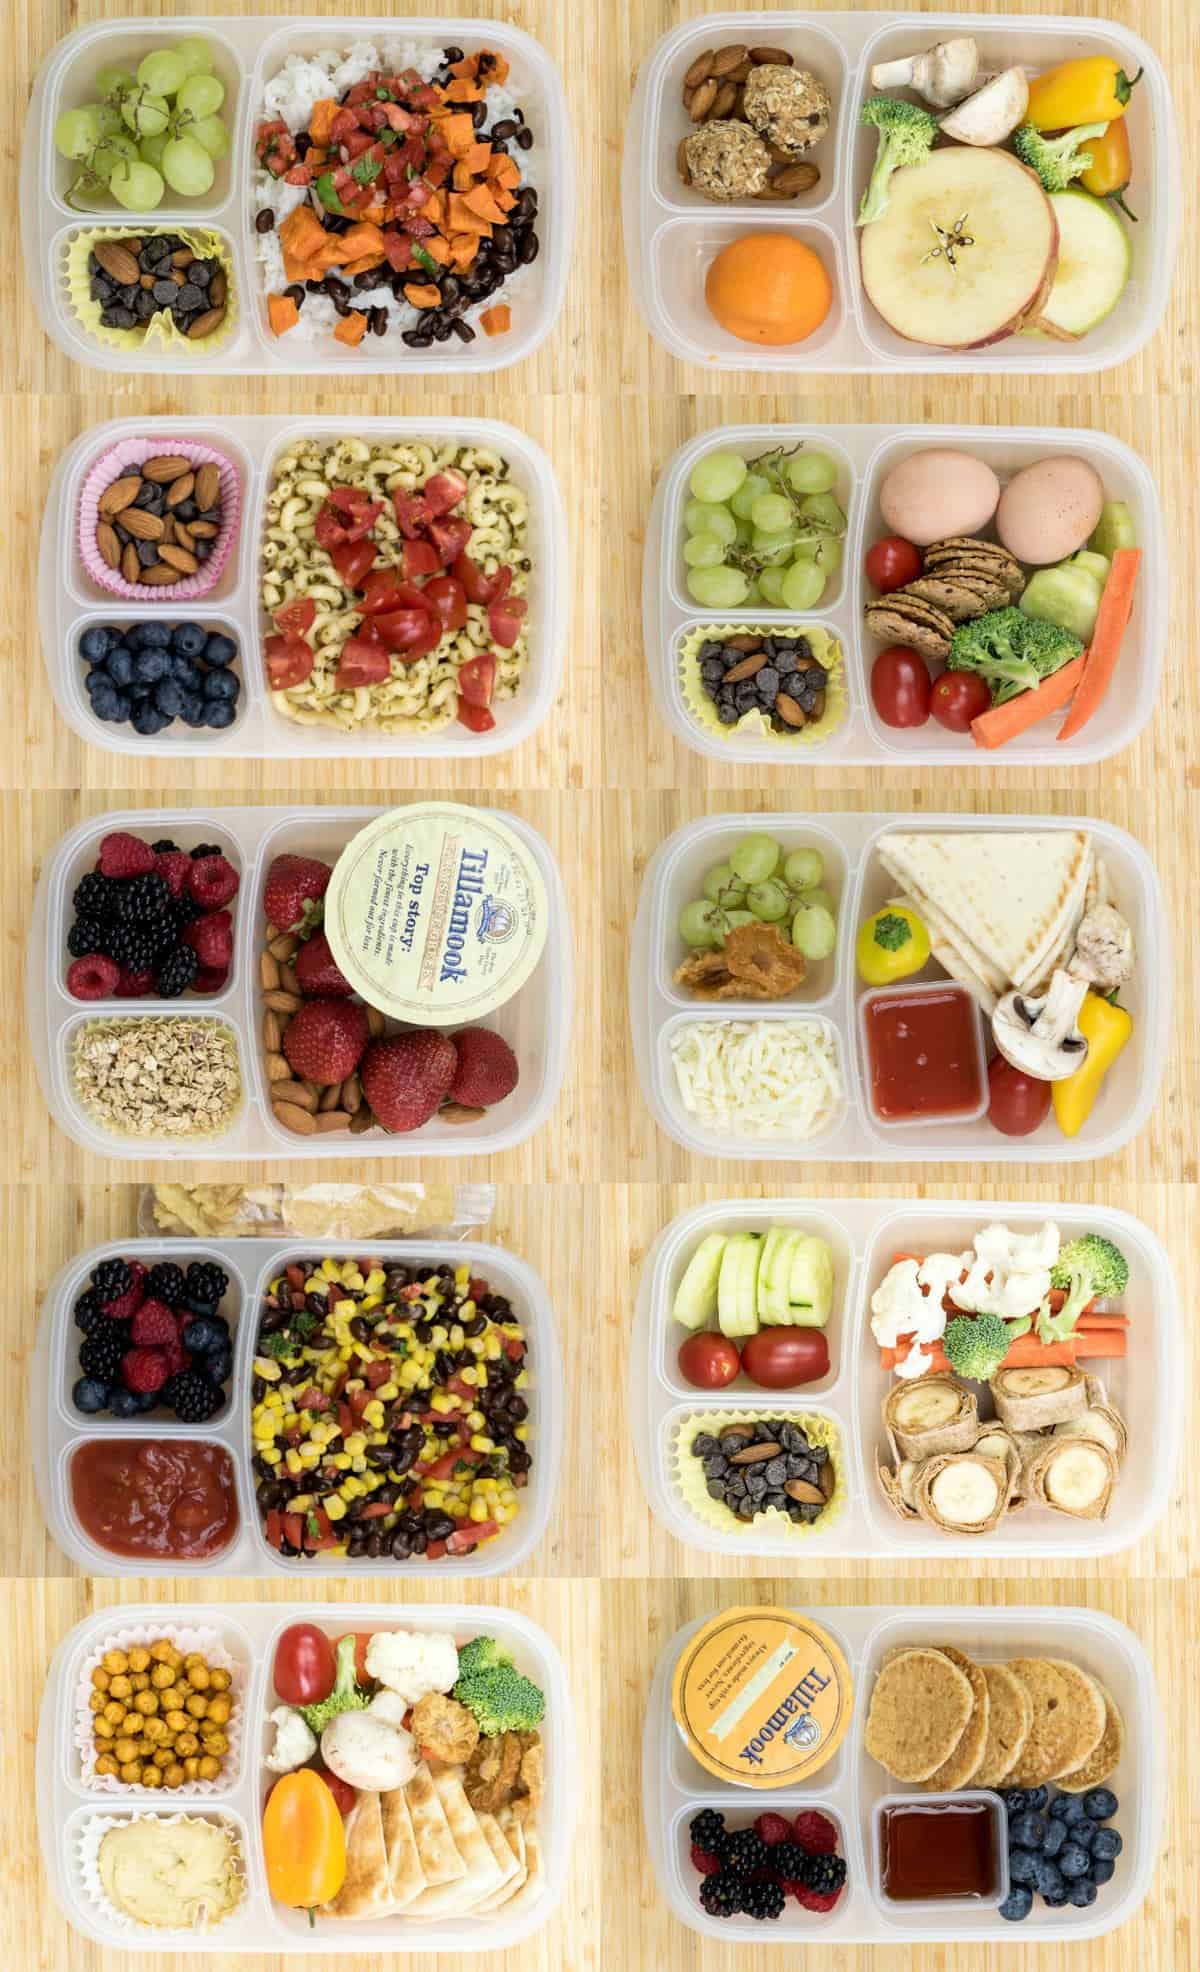 12 Healthy Lunch Box Ideas for Kids or Adults that are simple, wholesome, and meatless - no sandwiches included! These are perfect for back-to-school!